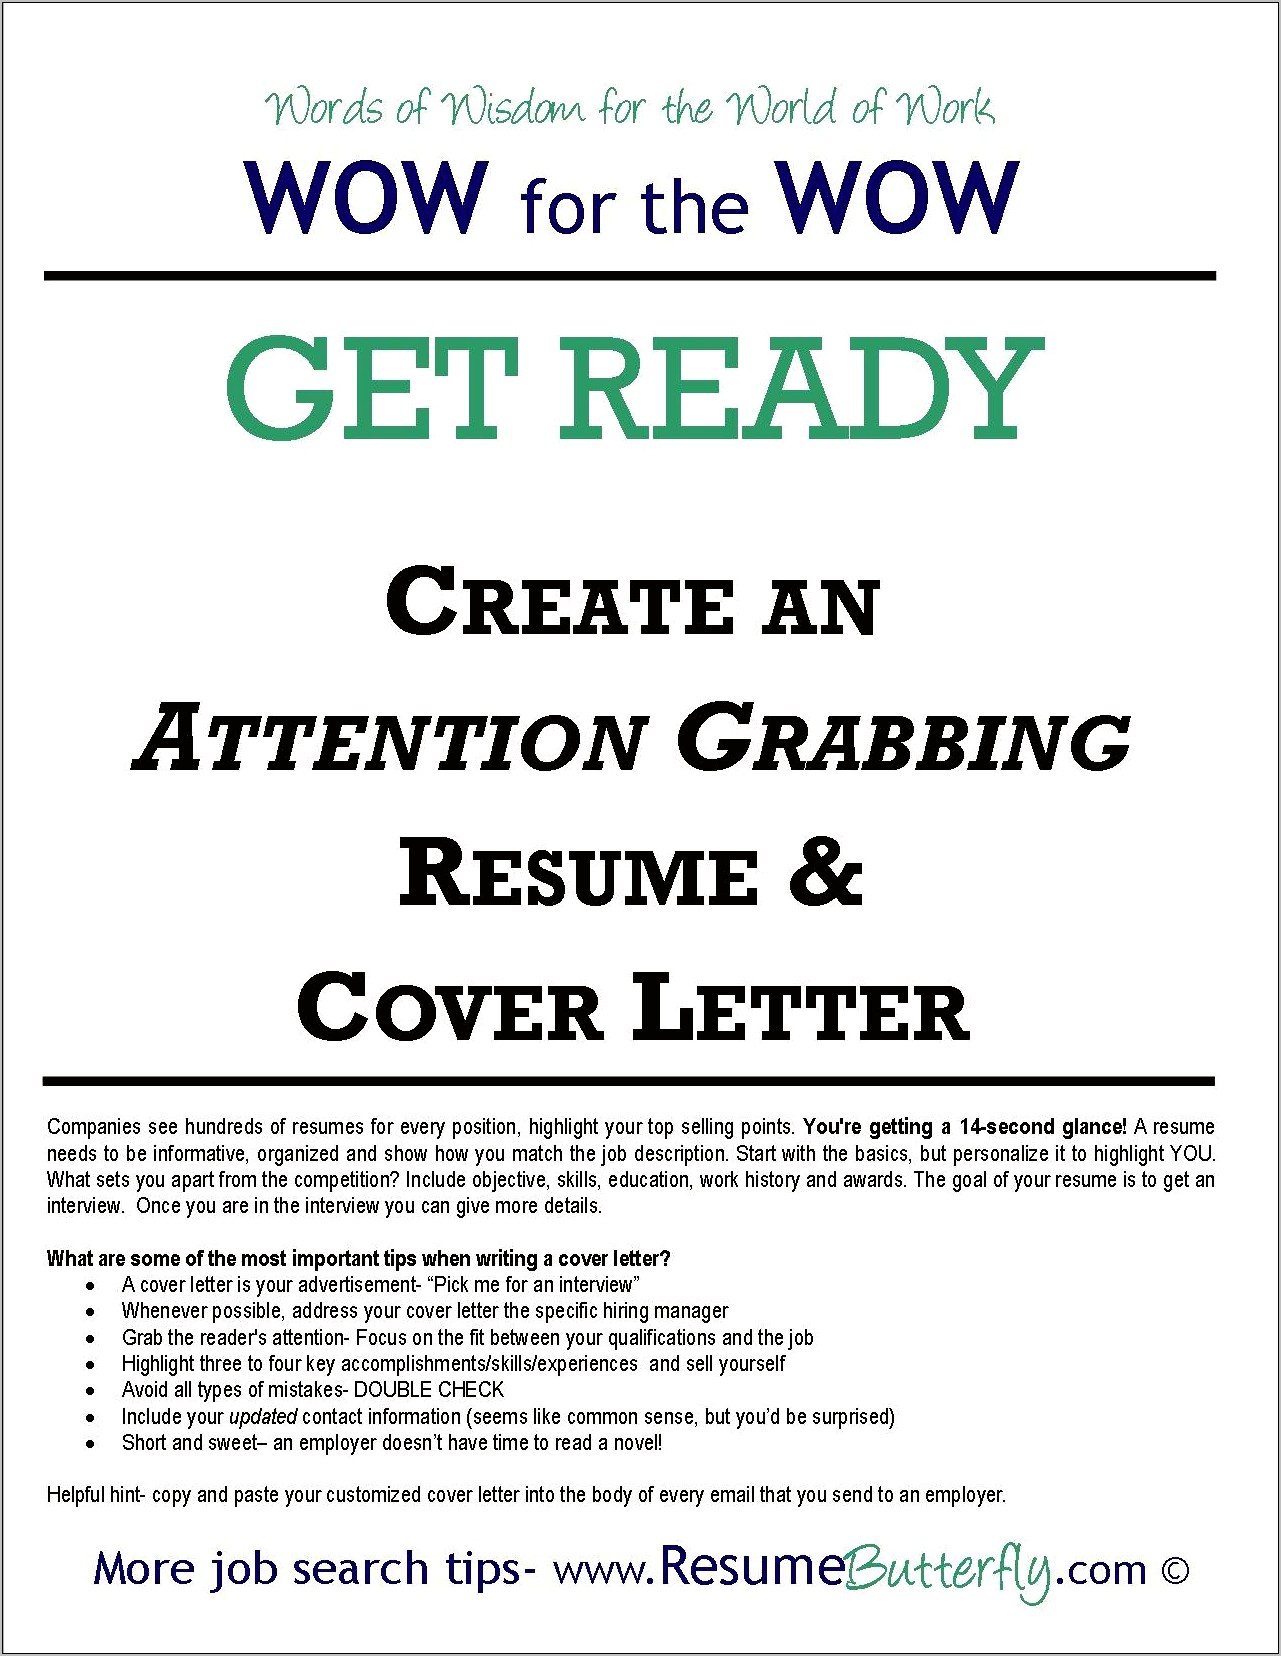 Resume And Cover Letter Site Blog